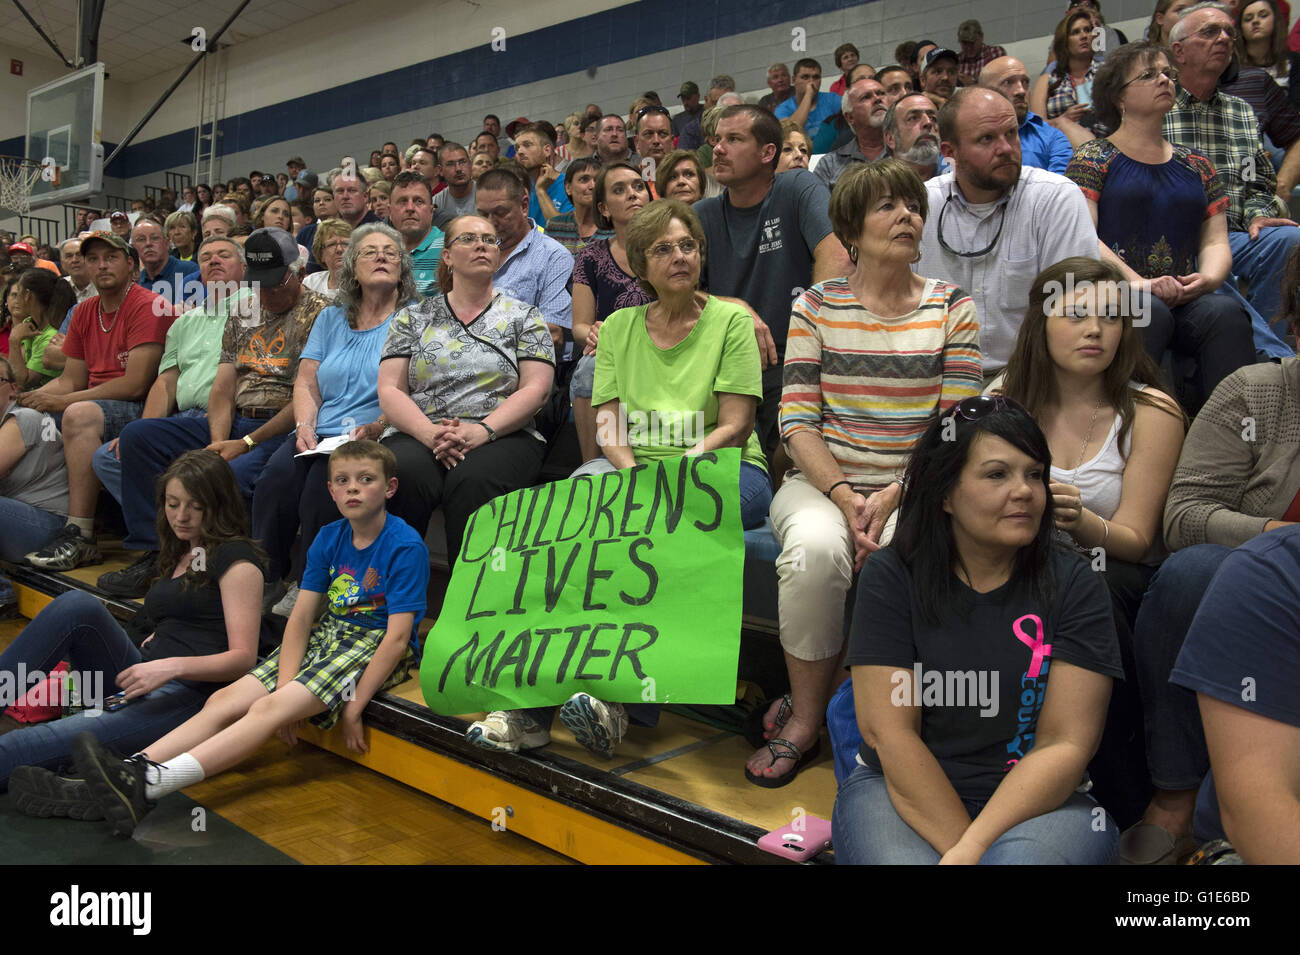 May 12, 2016 - Blue Ridge, GA - More than 500 residents of Fannin County, Georgia crowded into a high school cafeteria and gymnasium at a school board meeting to voice their opposition to any policy that allowed transgender students to use a gender-appropriate restroom in the schools. Several residents threatened to vote the board out of their positions if they set a policy that many other school systems deem fair to trans students. Local parents have vowed to remove their children from the schools if proposed laws are followed. If the school disregards anti-discrimination laws, the school s Stock Photo